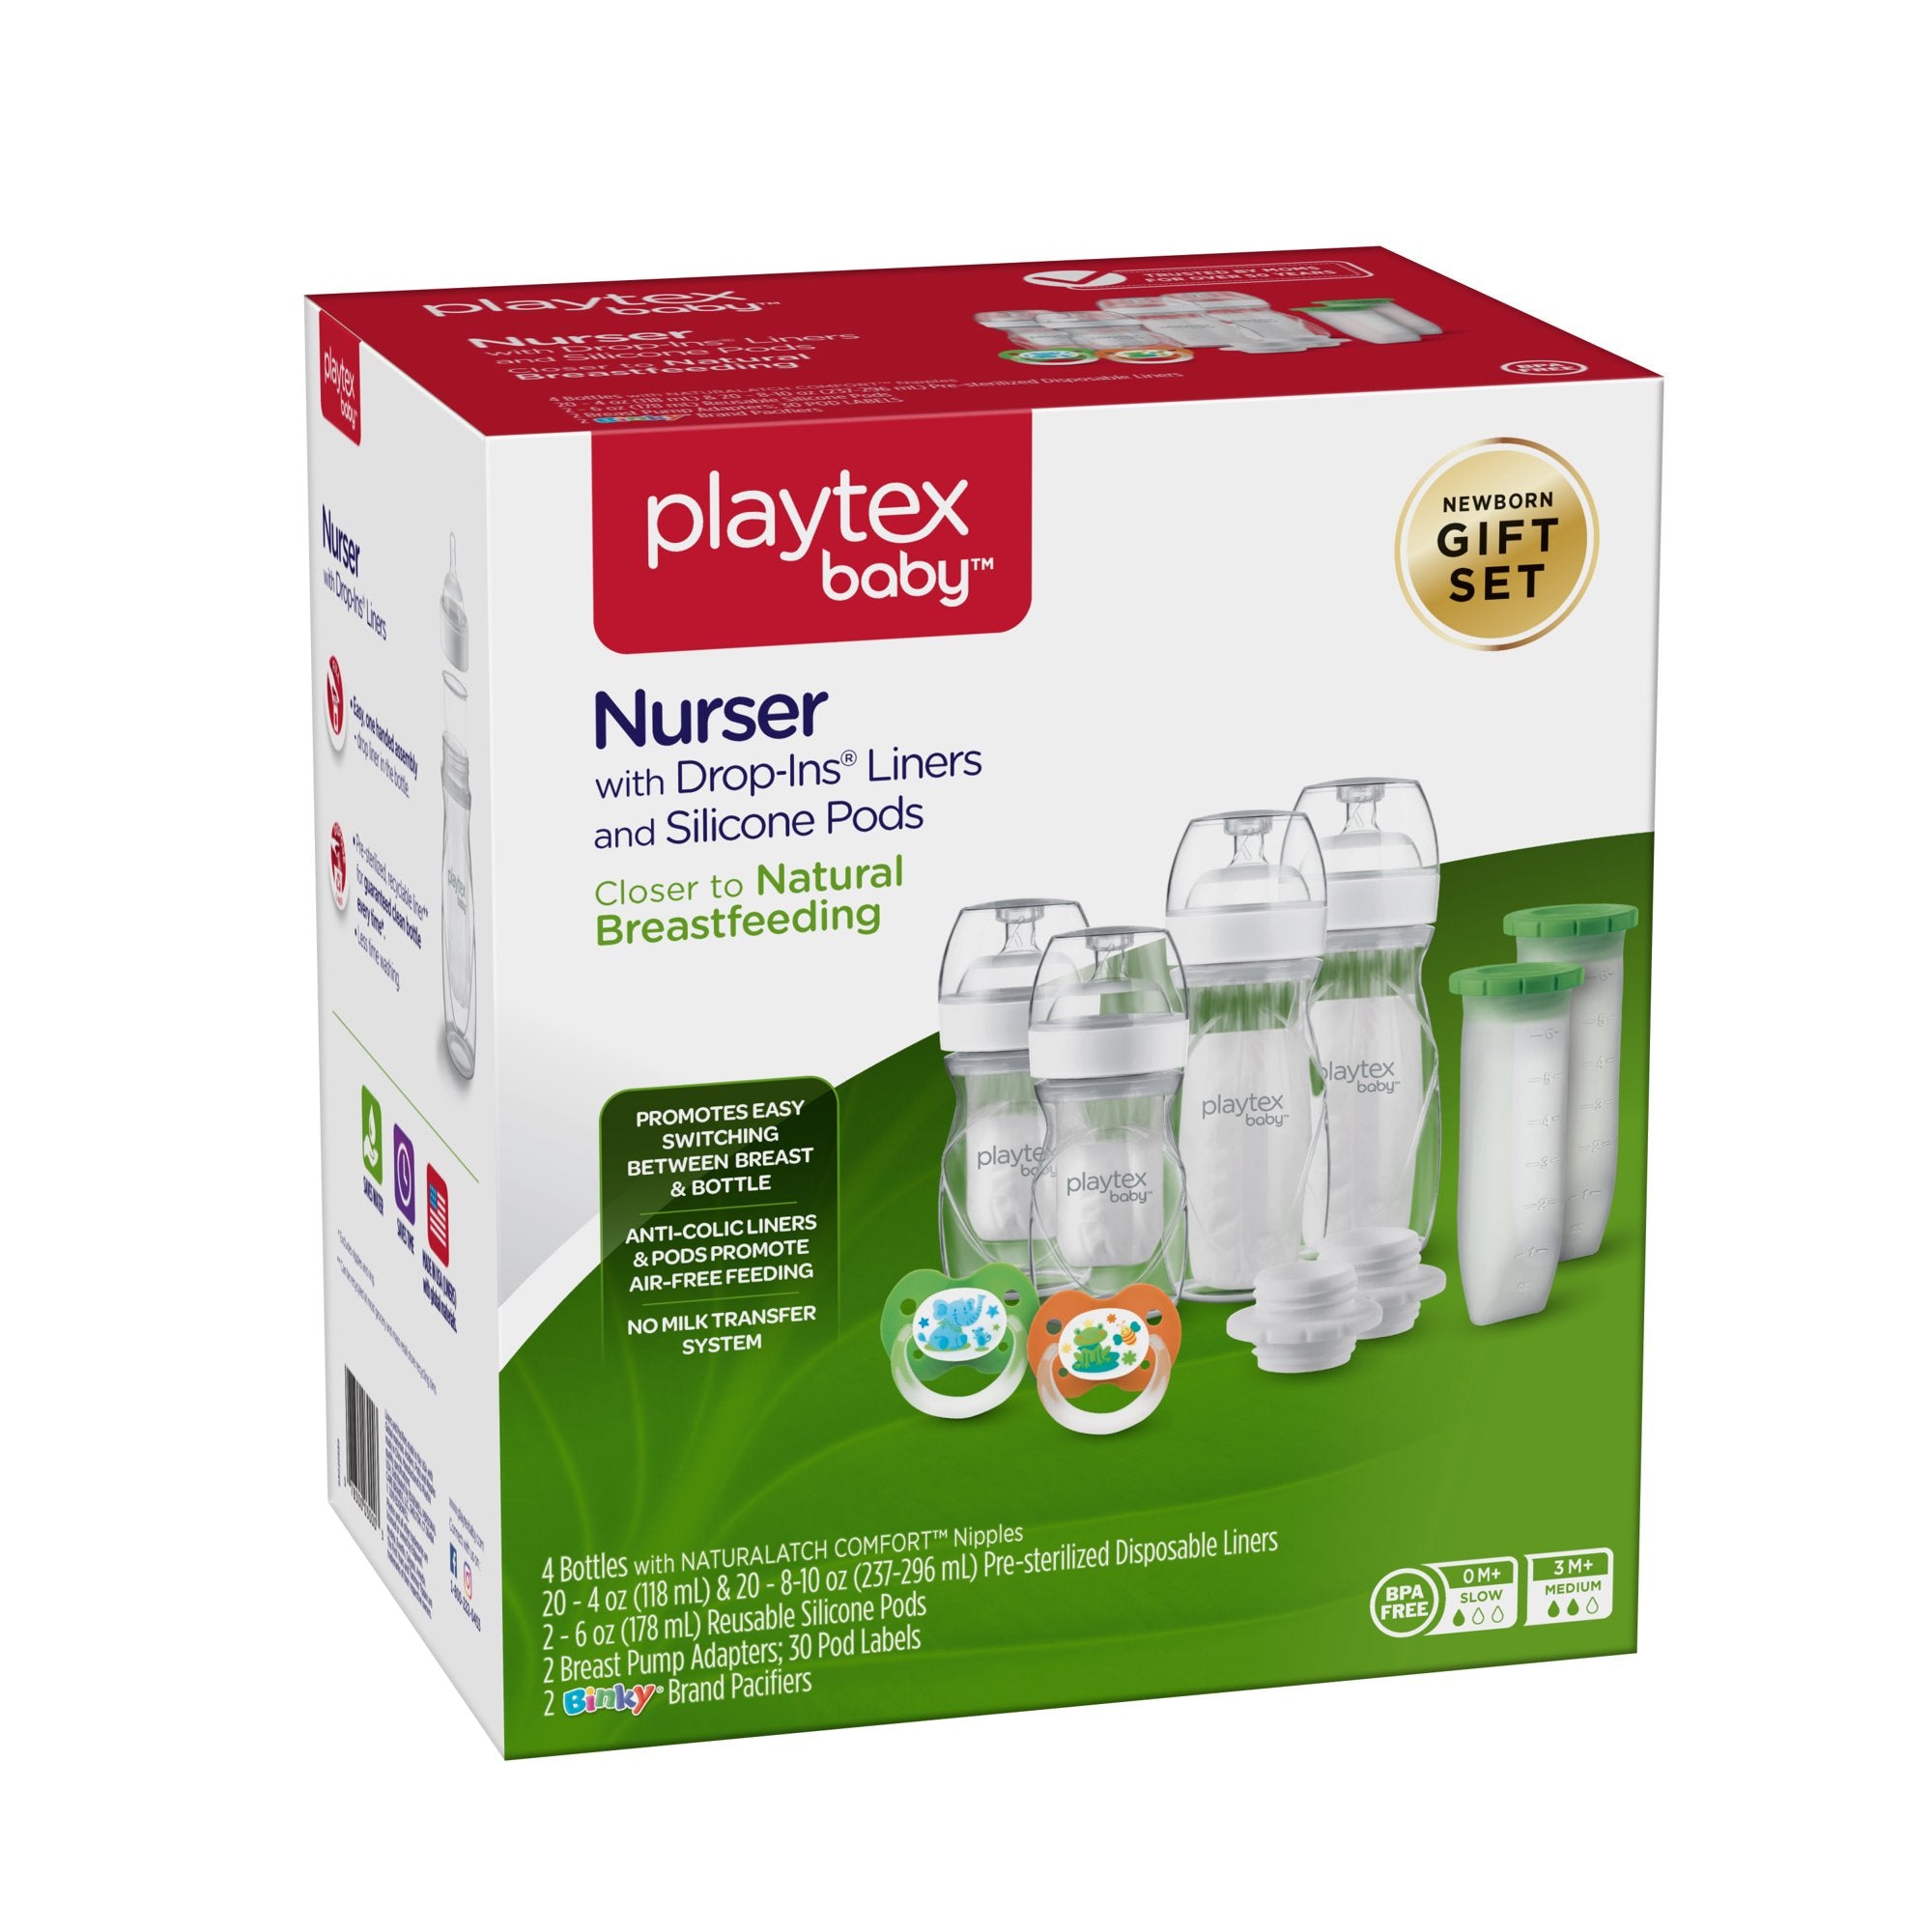 Playtex Baby Nurser DELUXE Gift Set with Drop In liners and Silicone Pods